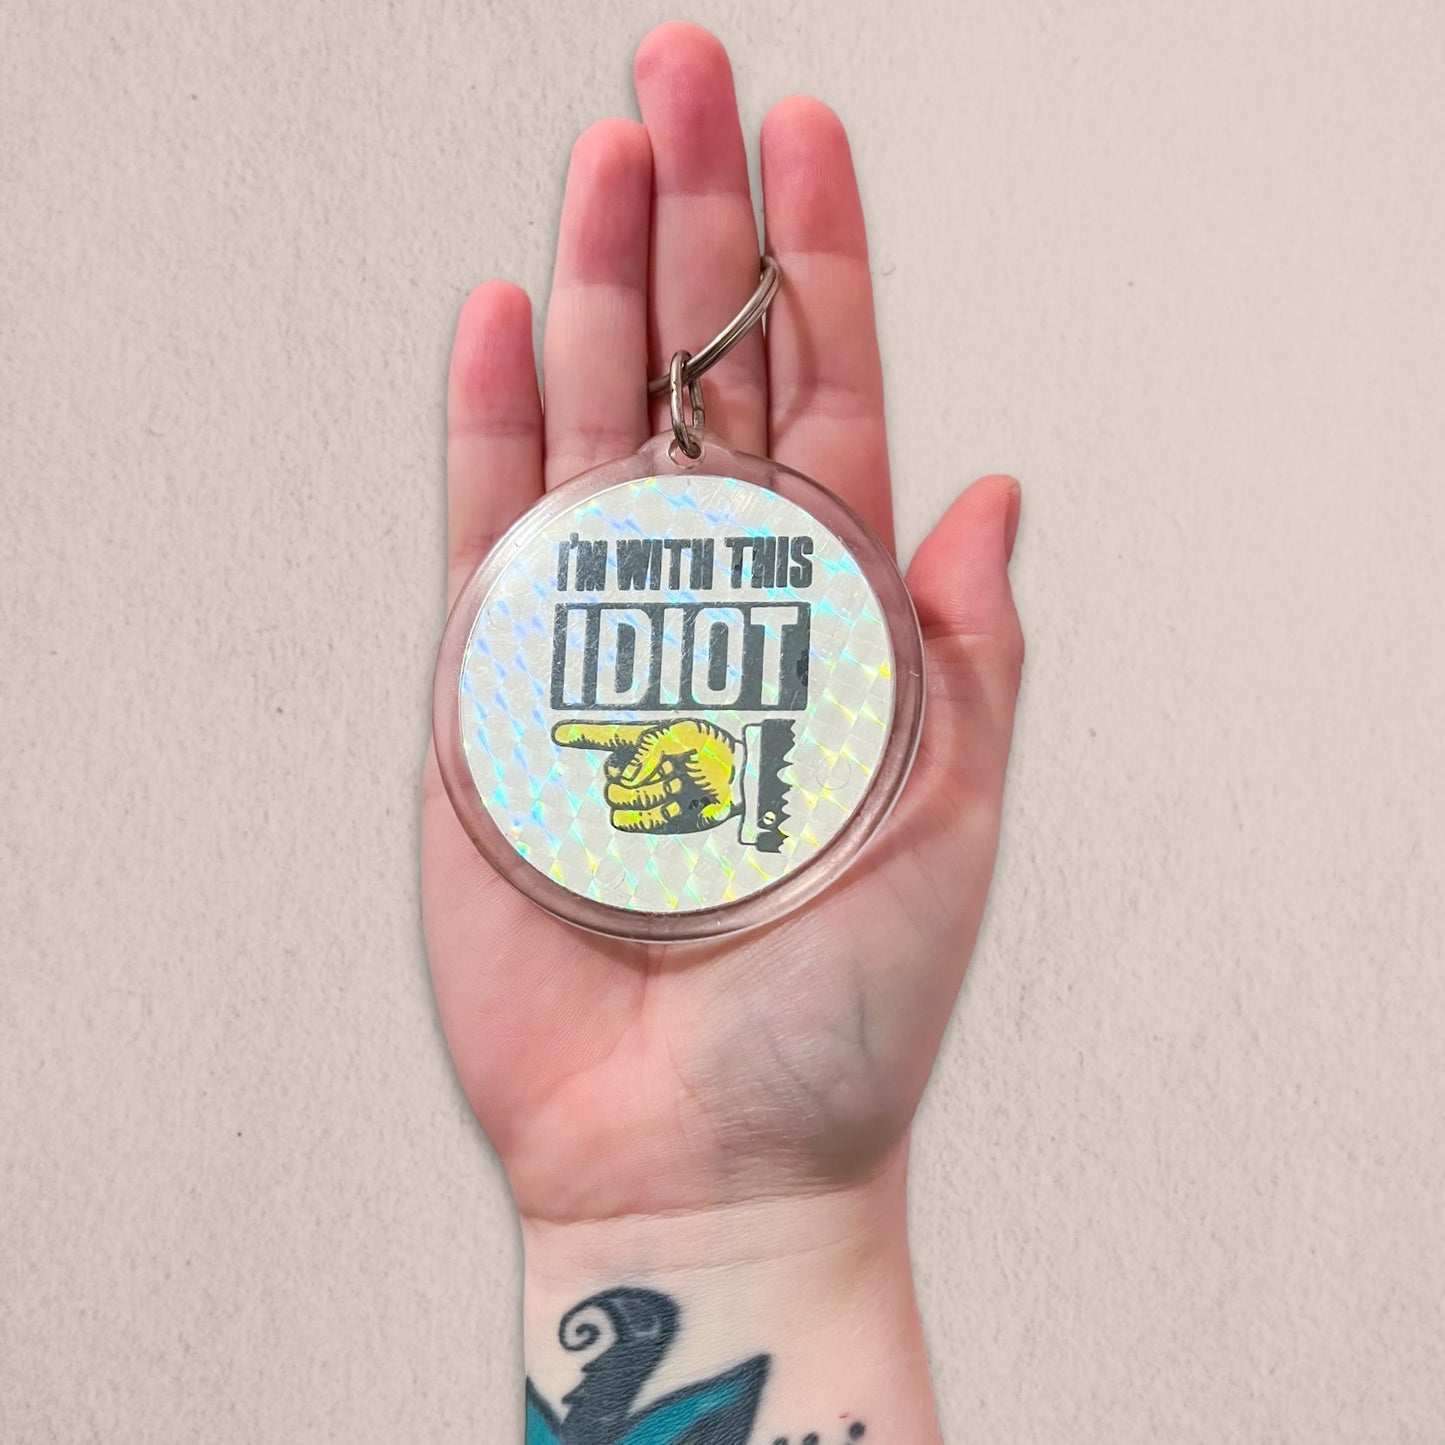 Vintage 1970s I’m With This Idiot Large Prismatic Keyring